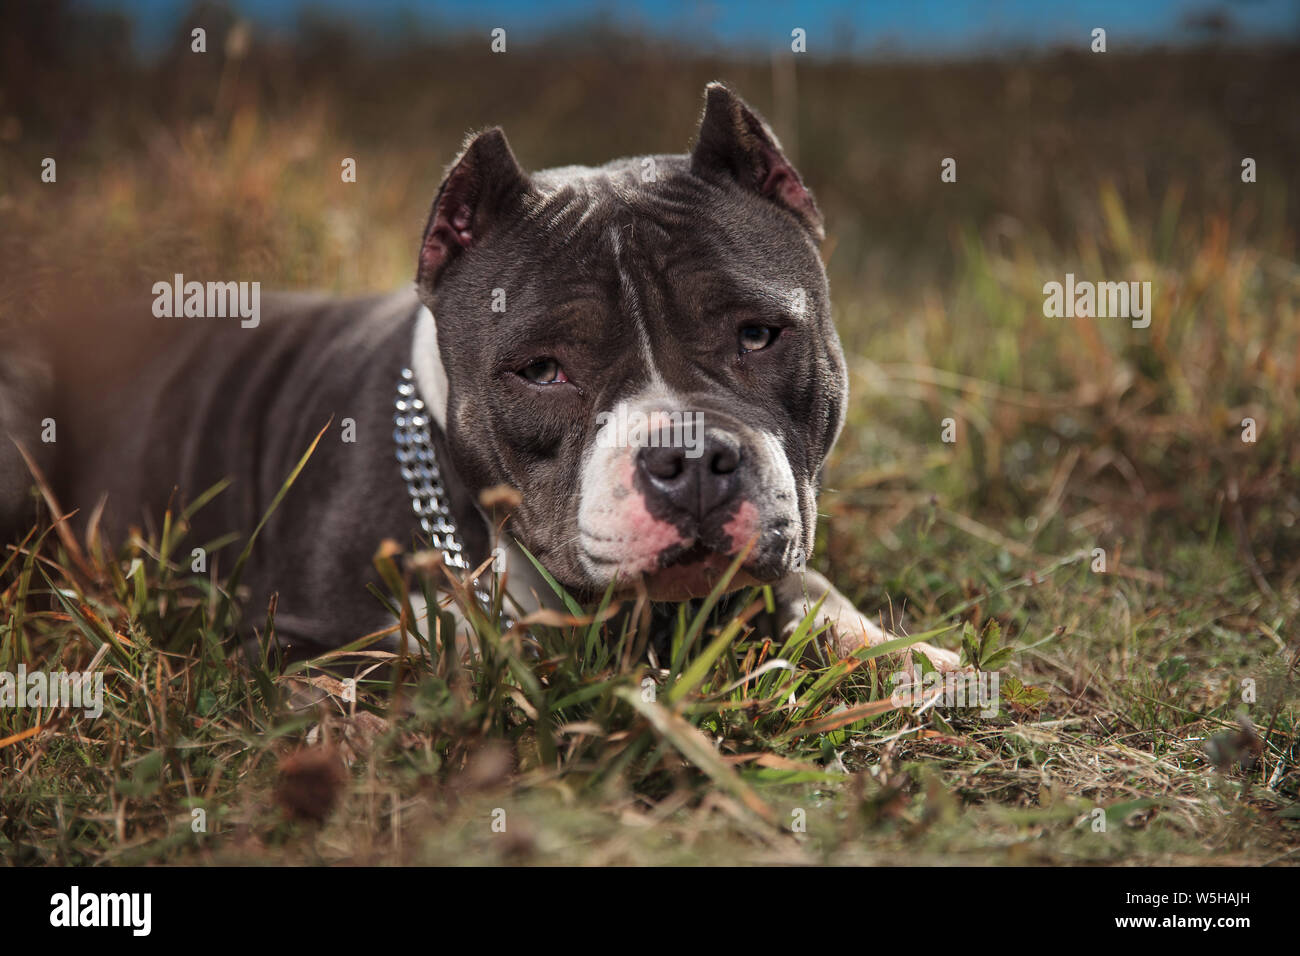 Amstaff dog curiously staring forward with its mouth closed while laying down on outdoor background Stock Photo